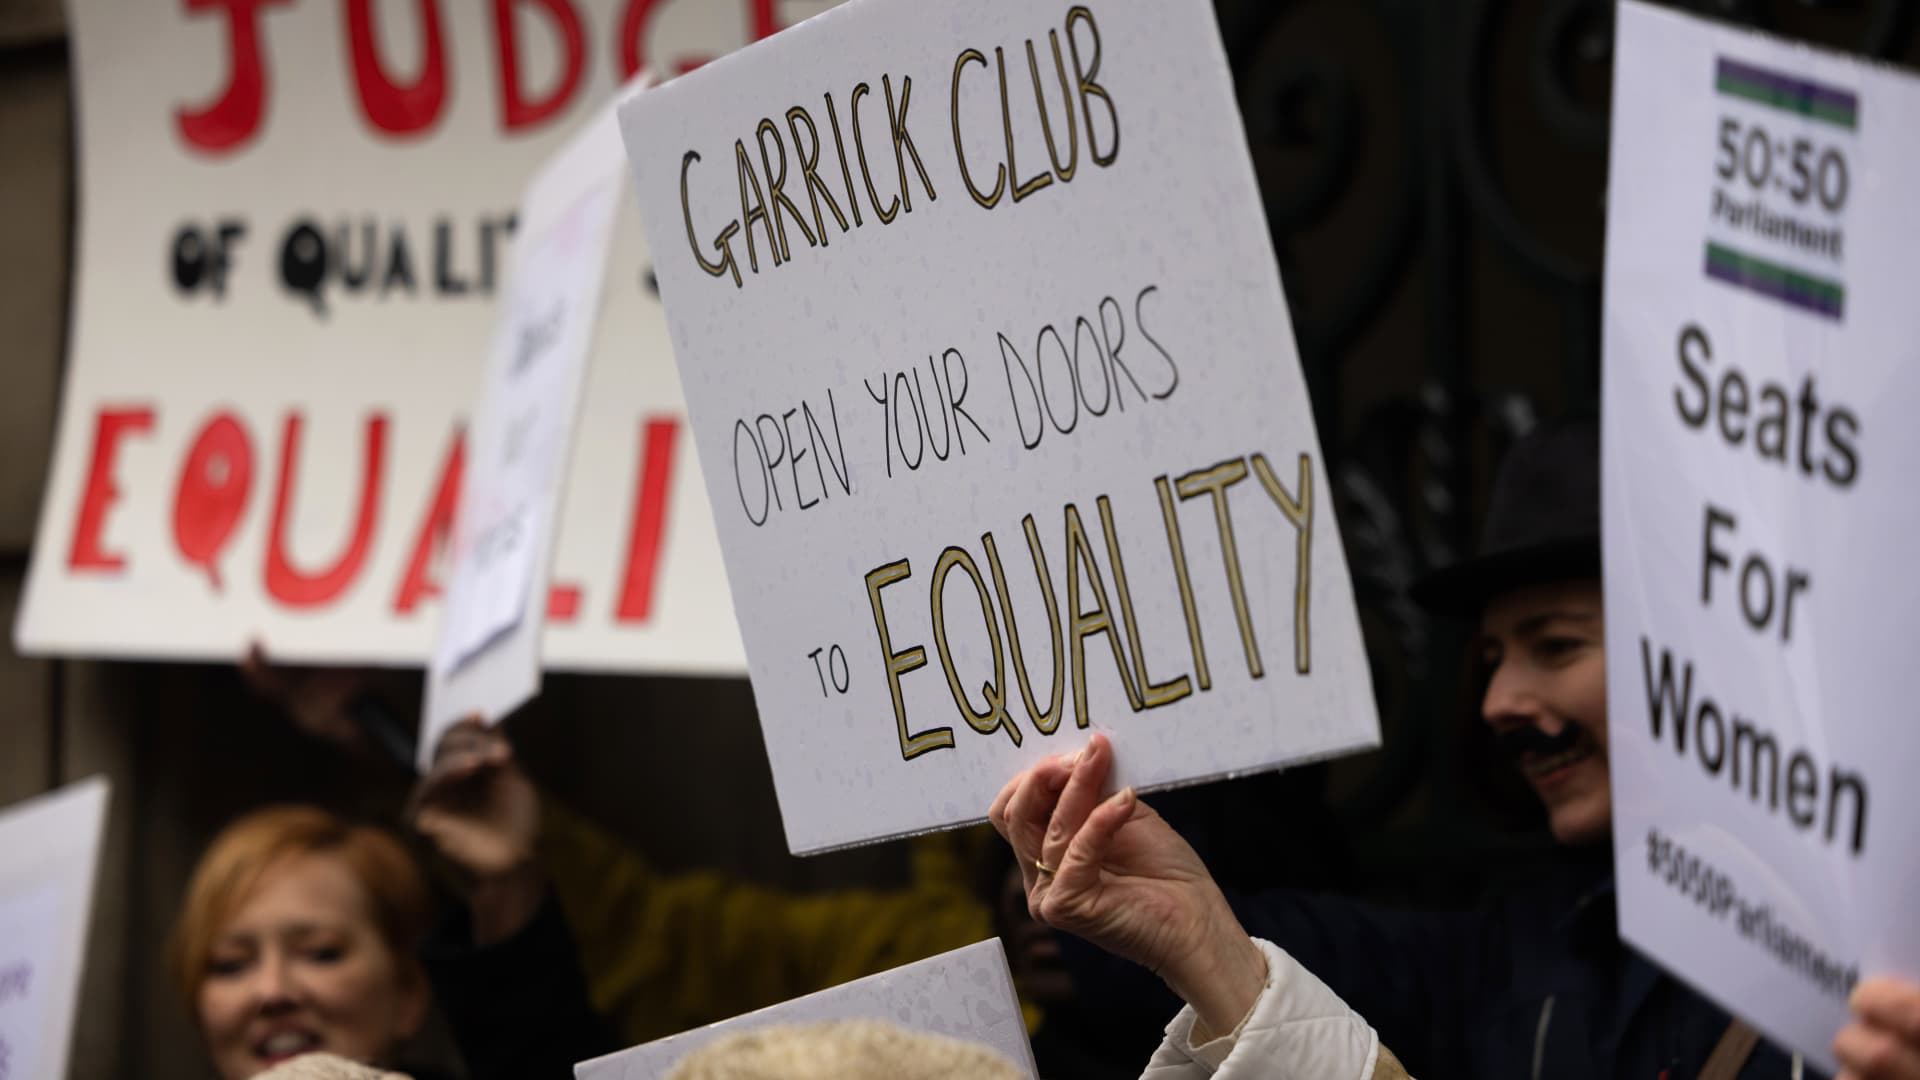 London's elite Garrick Club votes to allow women for the first time